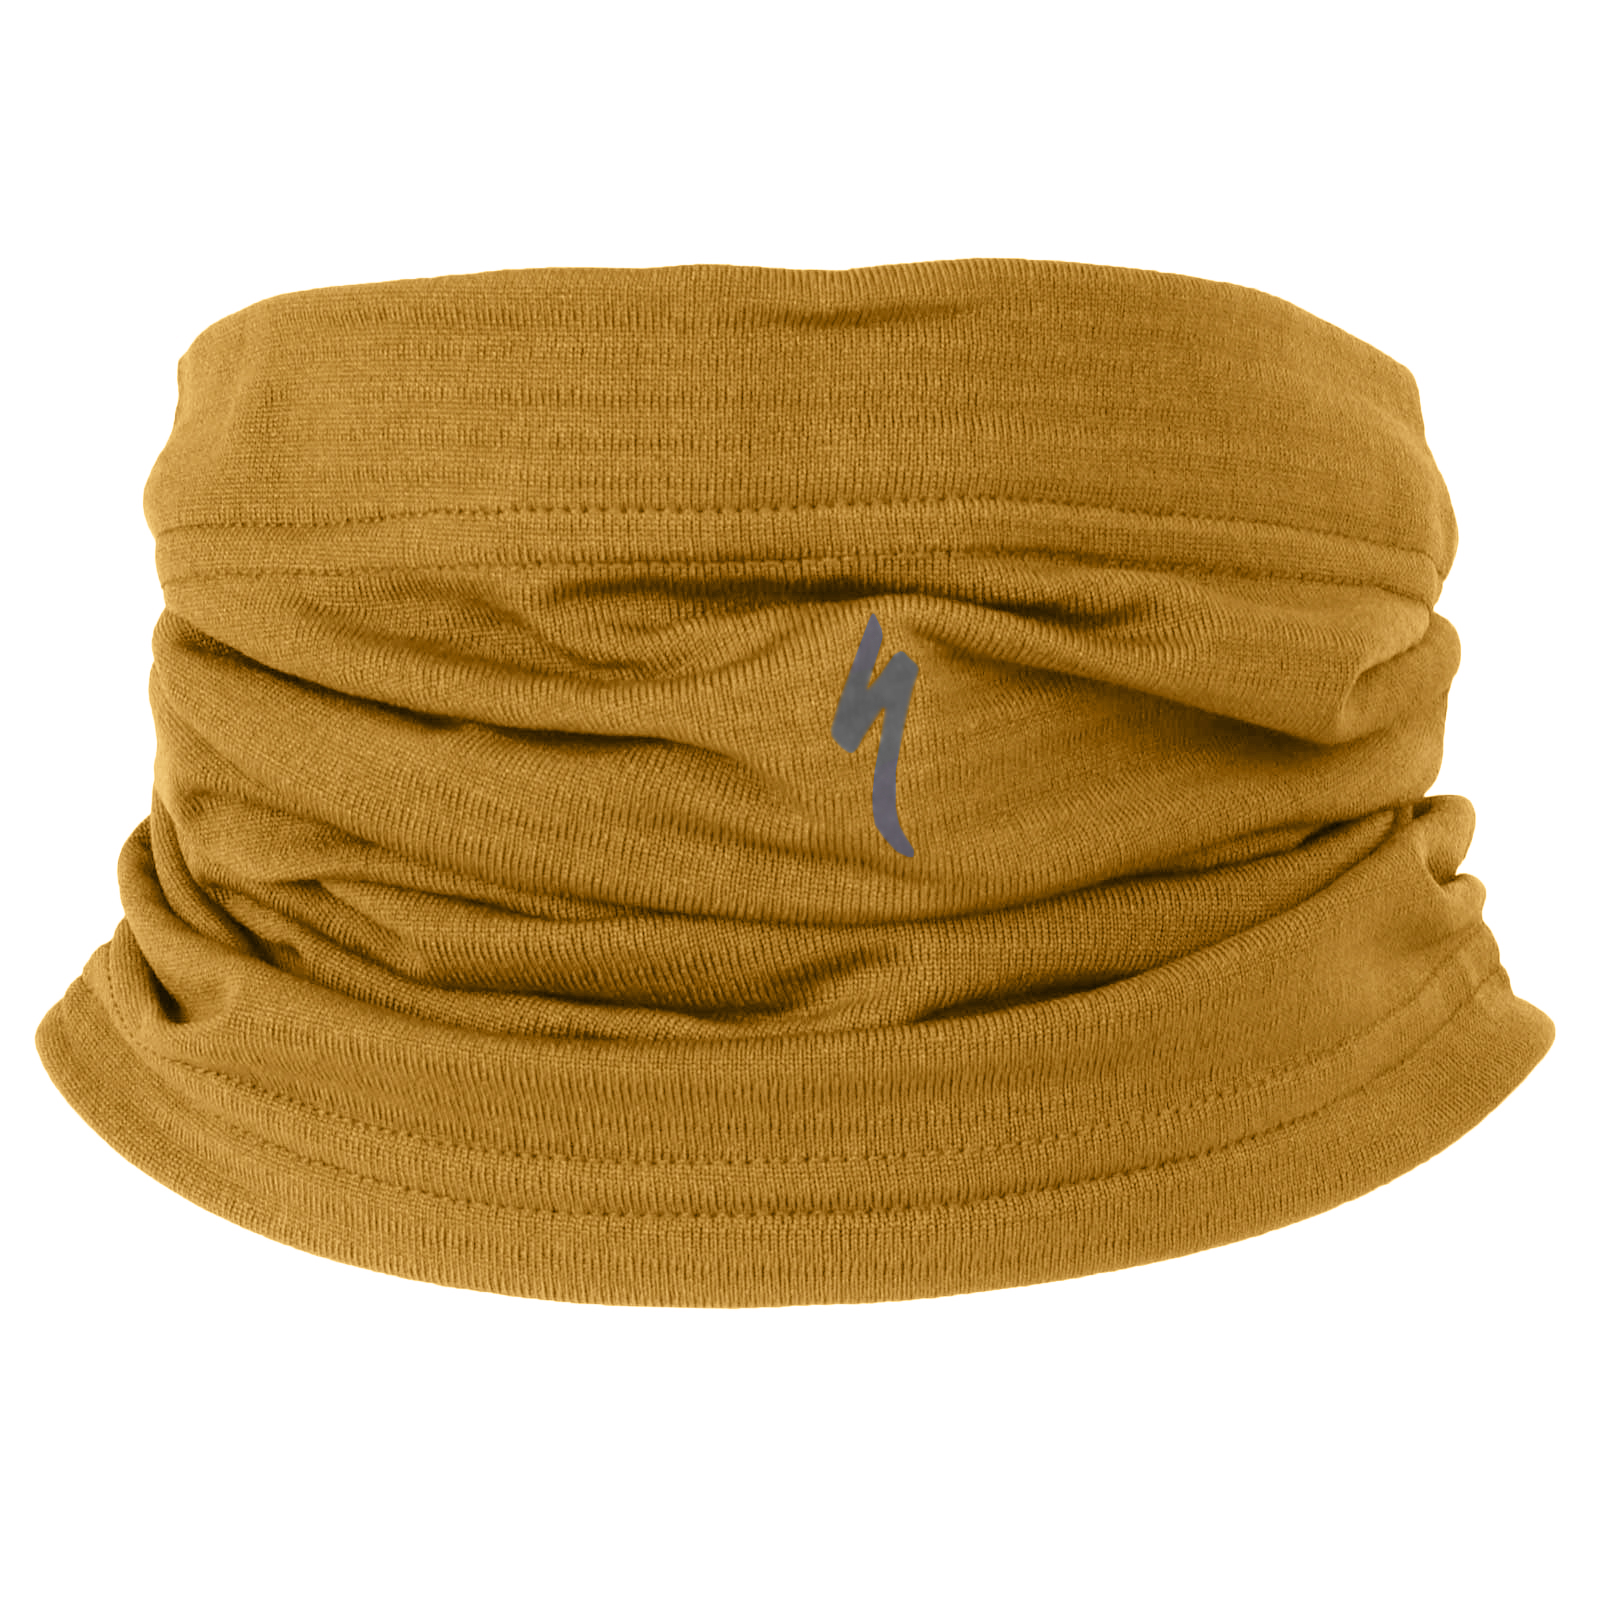 Picture of Specialized Prime Power Grid Neck Gaiter - harvest gold